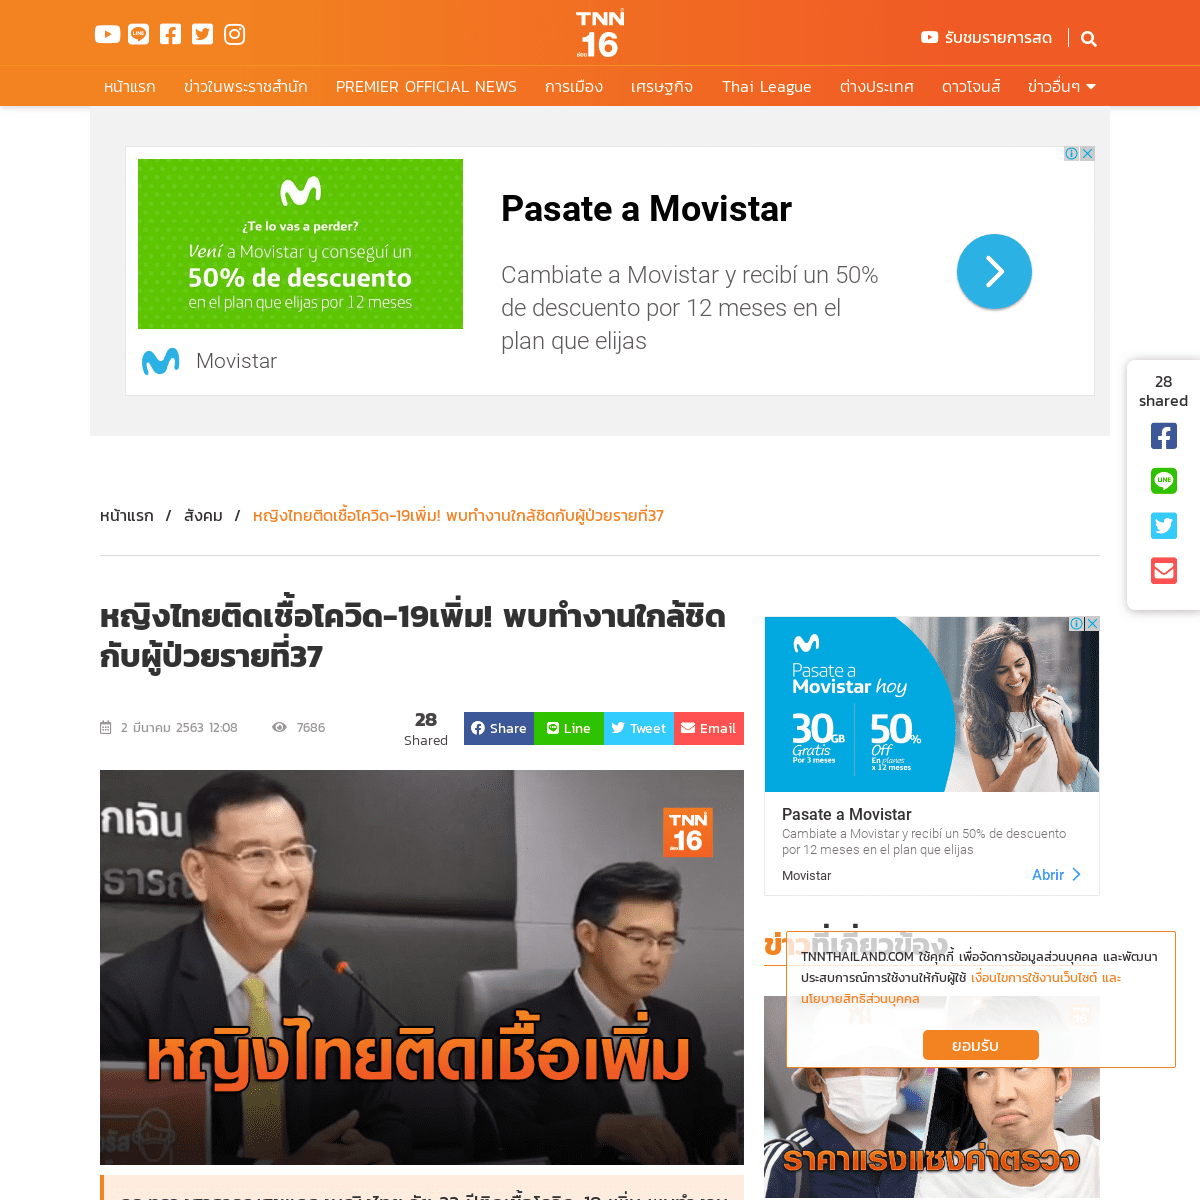 A complete backup of www.tnnthailand.com/content/30581